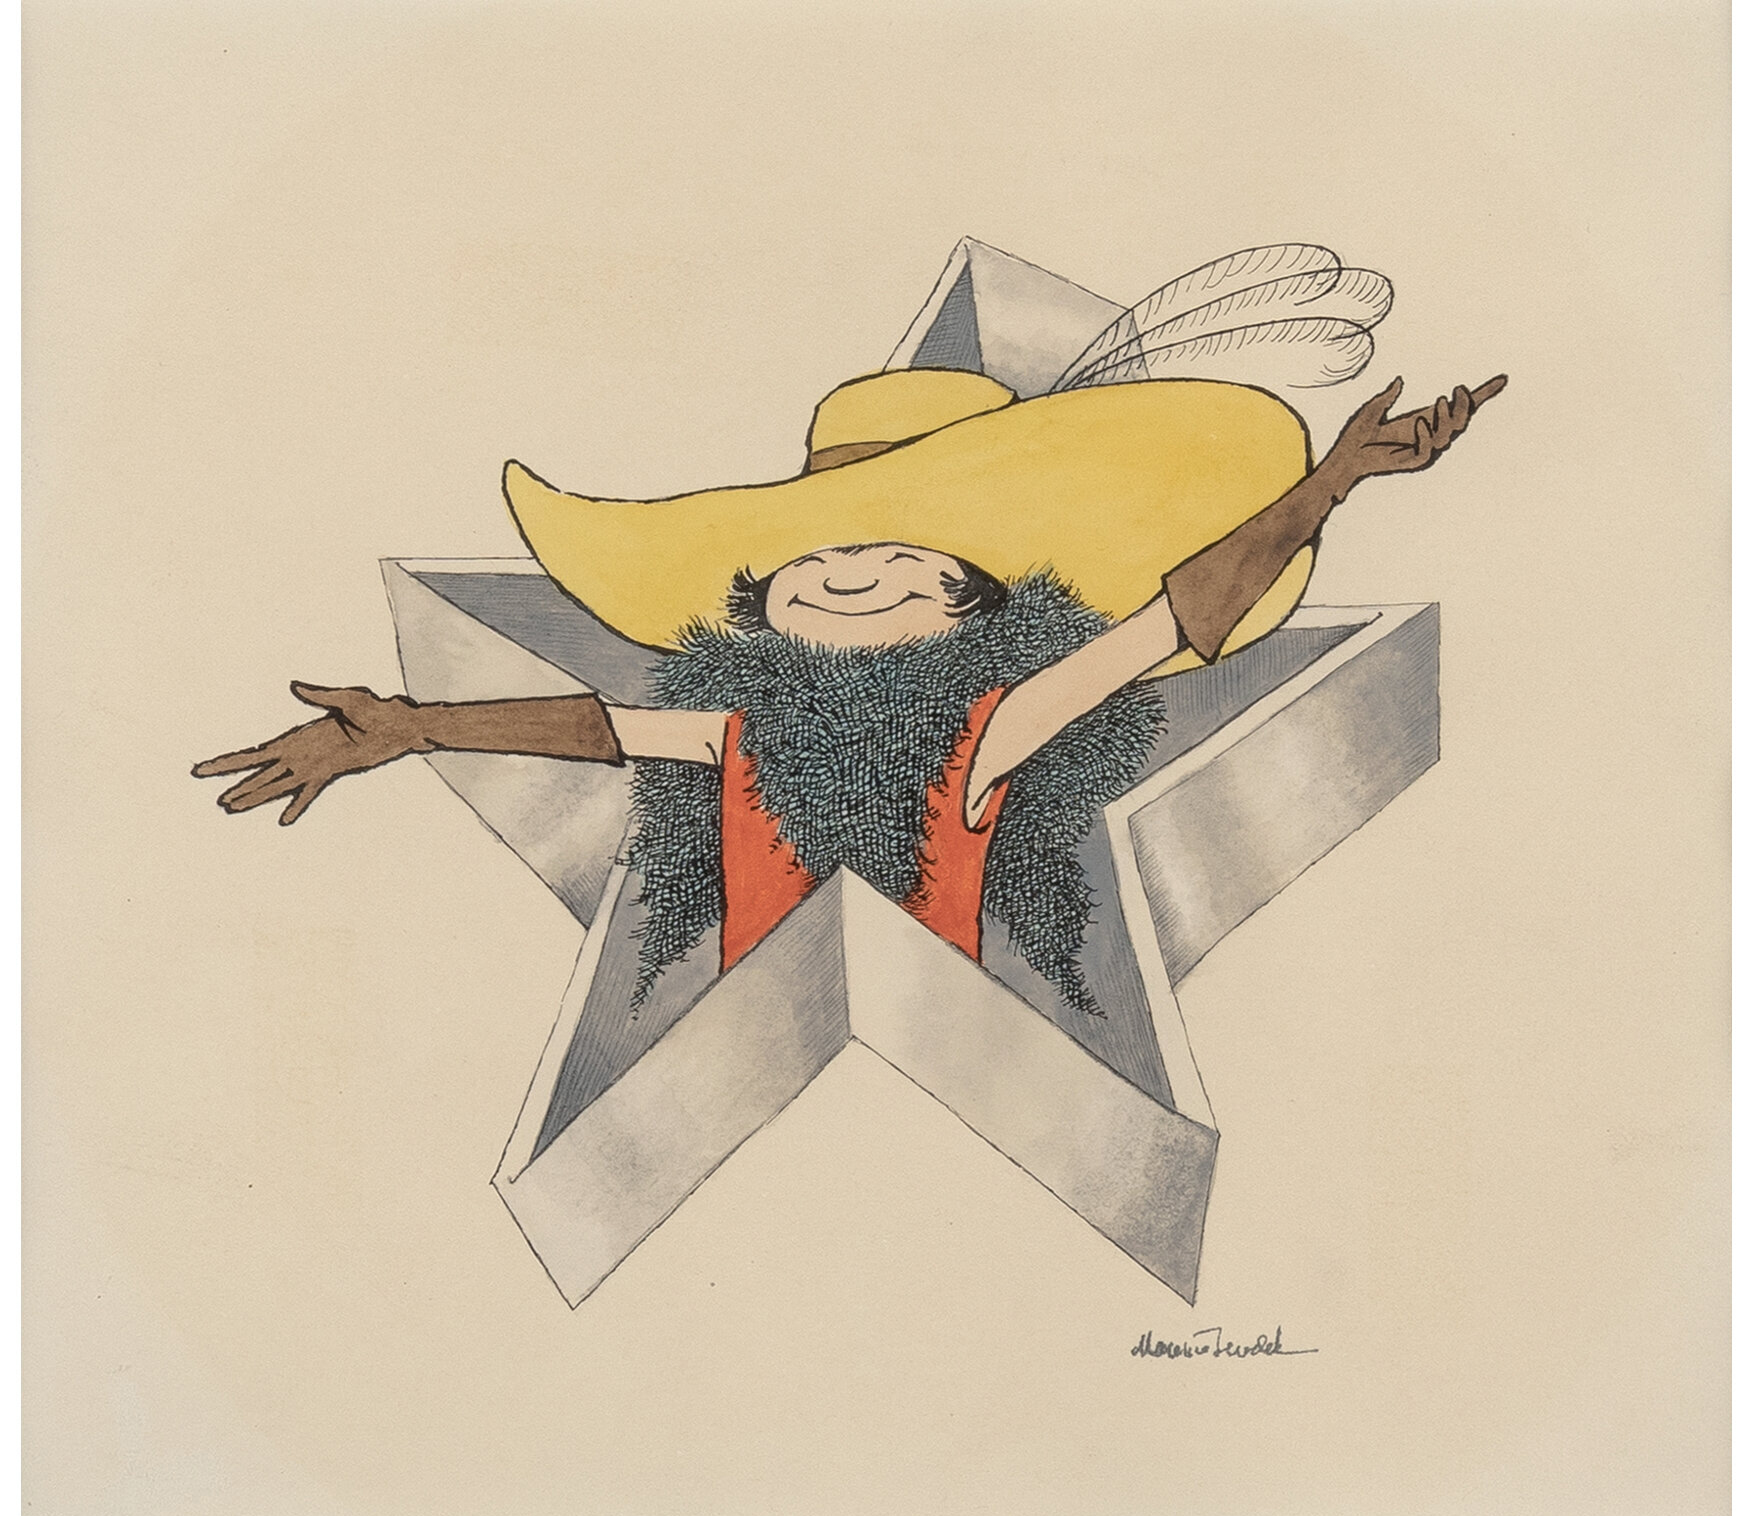 Maurice Sendak, ‘No Star Shines as Bright as Me,’ from ‘Really Rosie.’ Image courtesy of Heritage Auctions, ha.com